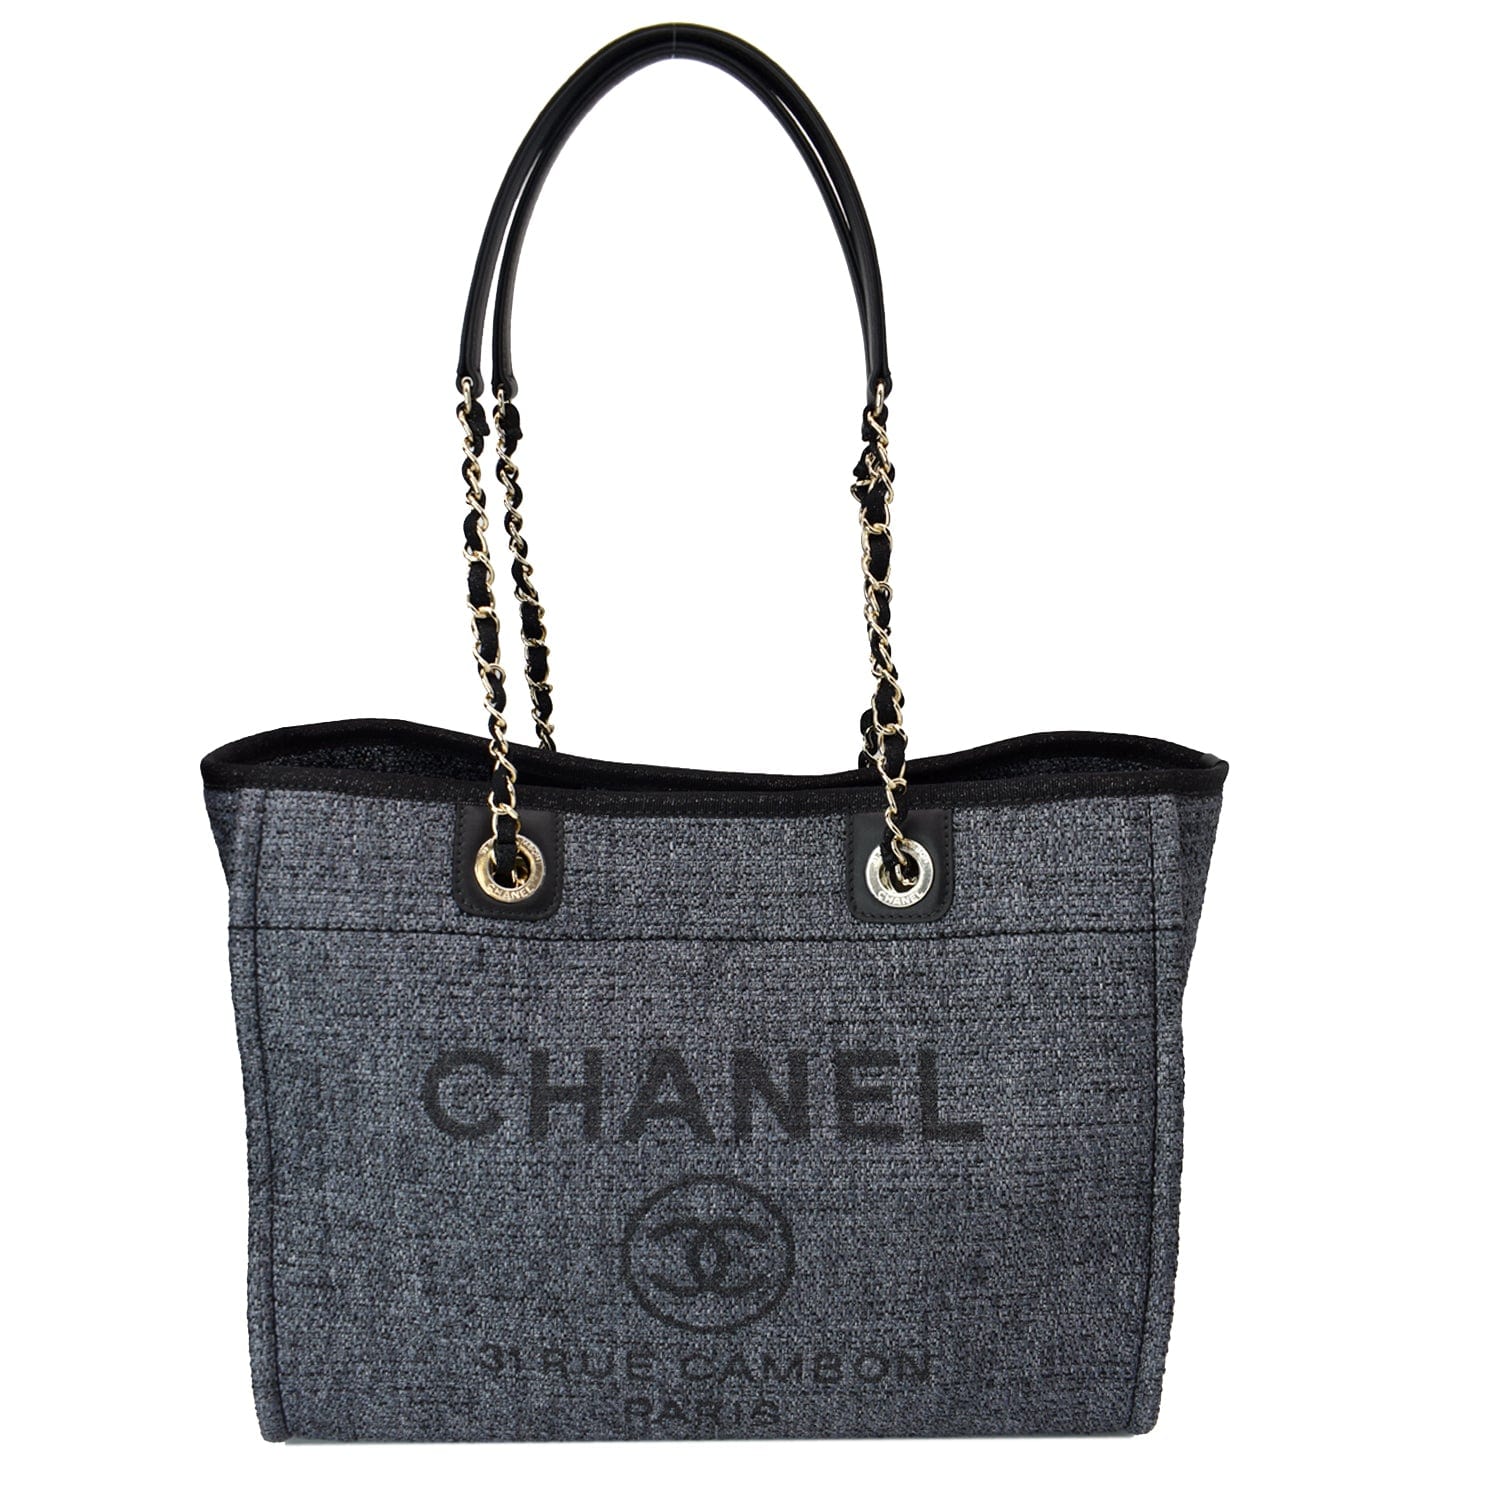 CHANEL Deauville Small Lurex Boucle Canvas Tote Bag Grey - 10% Off